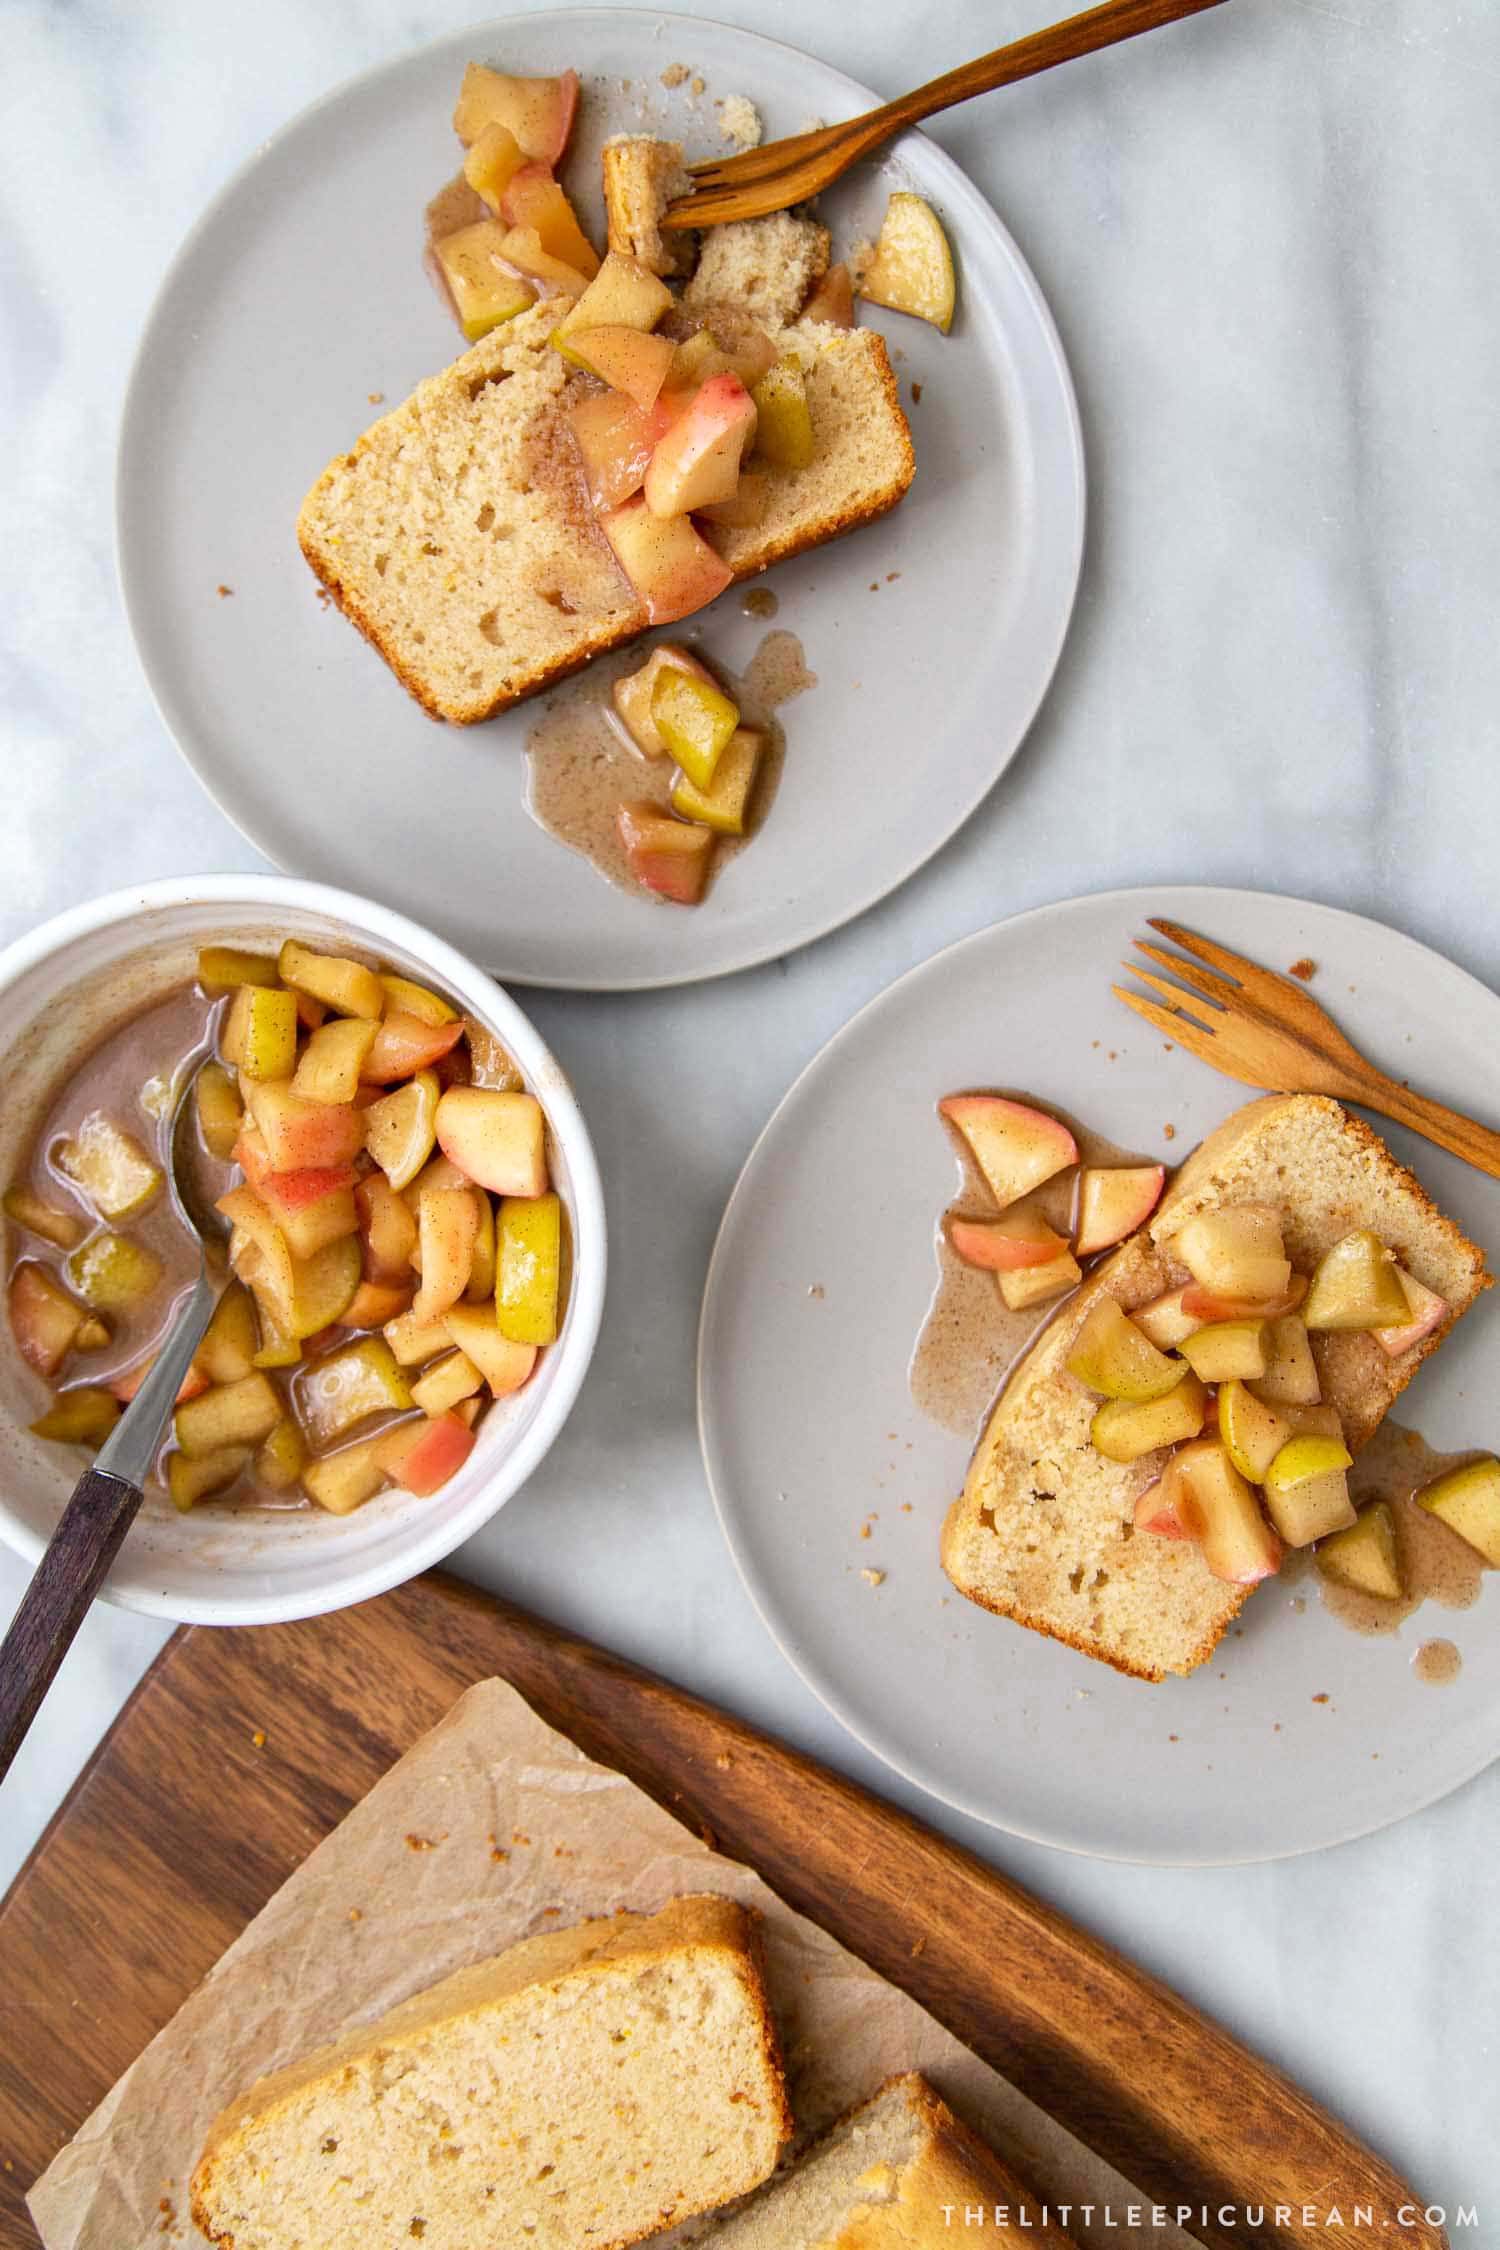 Spiced loaf cake topped with stewed apples